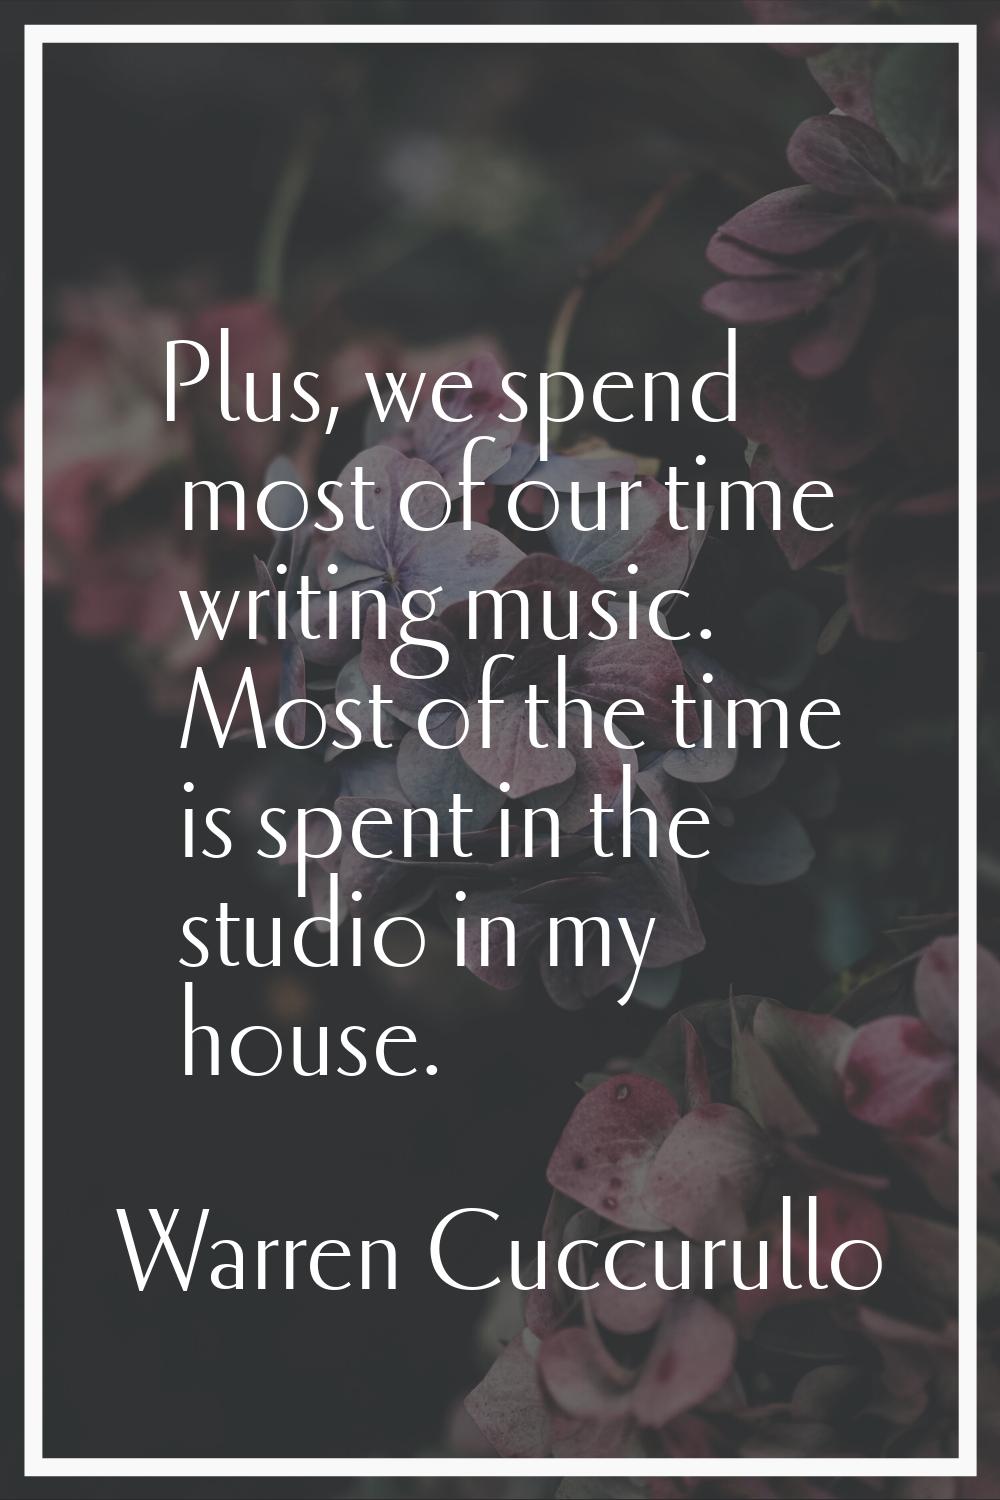 Plus, we spend most of our time writing music. Most of the time is spent in the studio in my house.